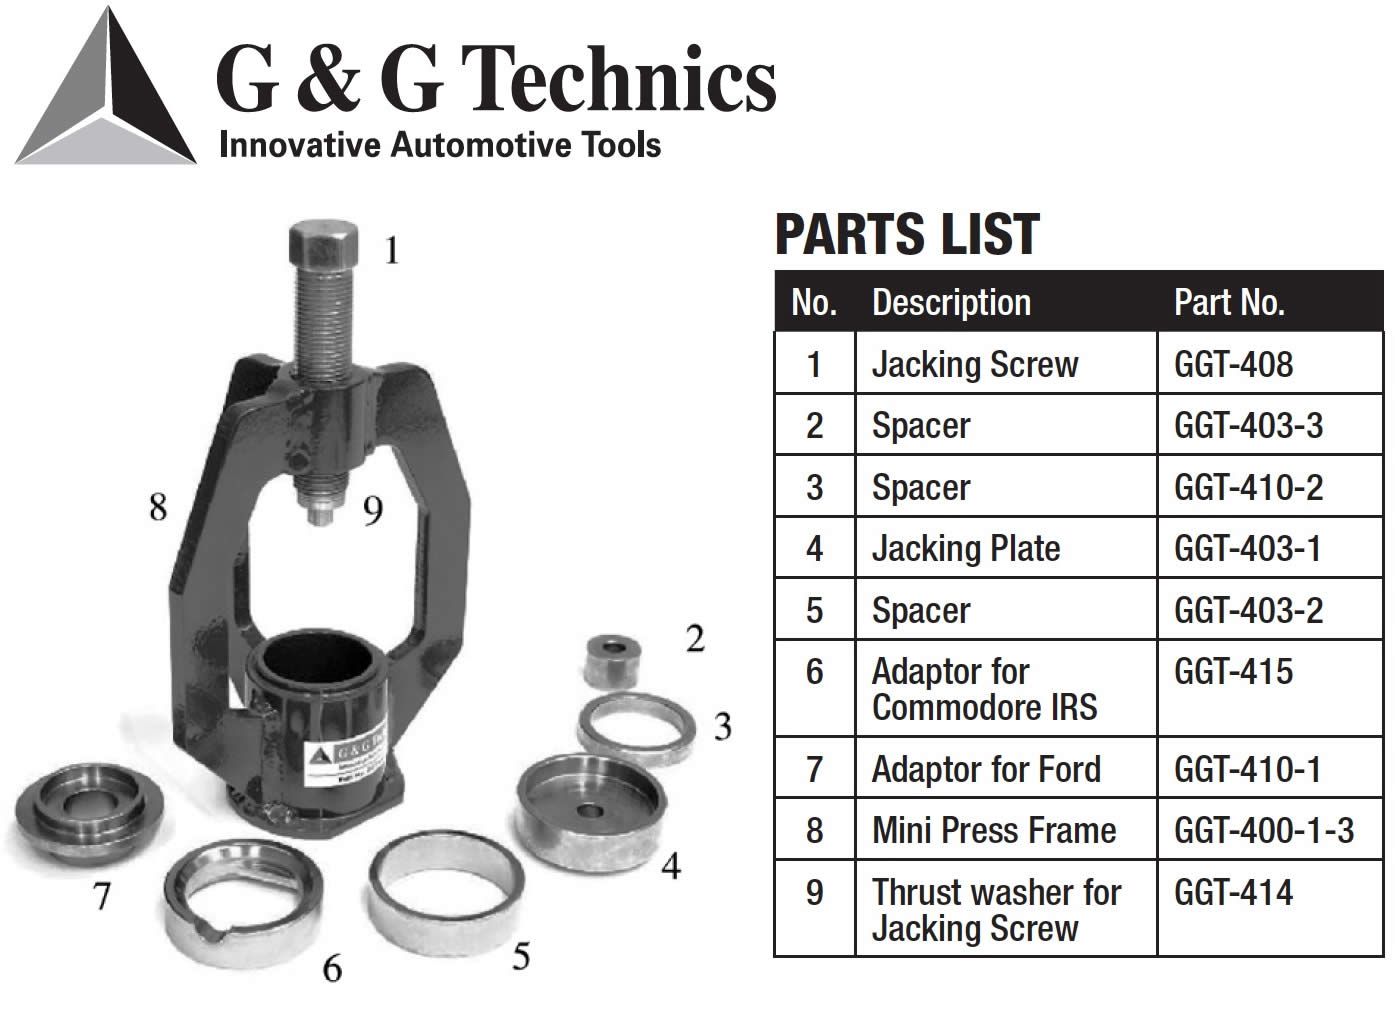 G_And_G_Parts_List_17_3_2014.jpg